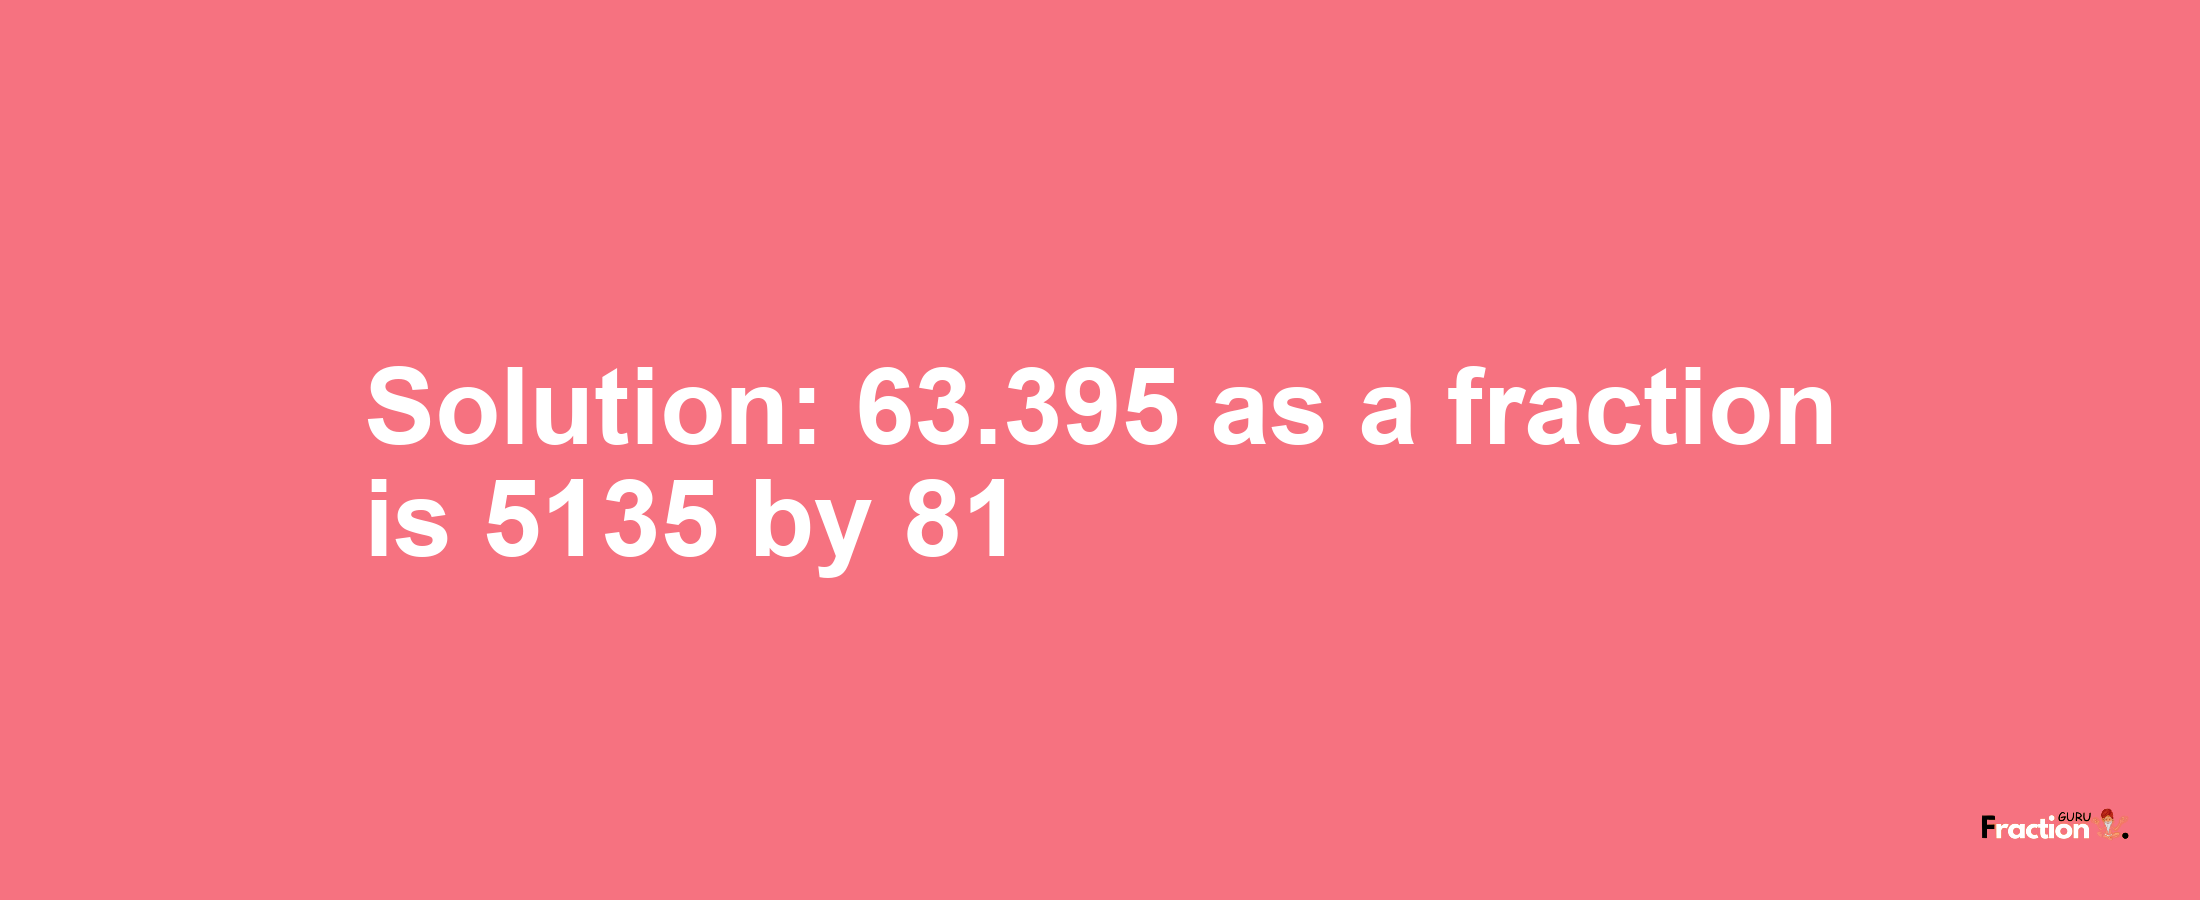 Solution:63.395 as a fraction is 5135/81